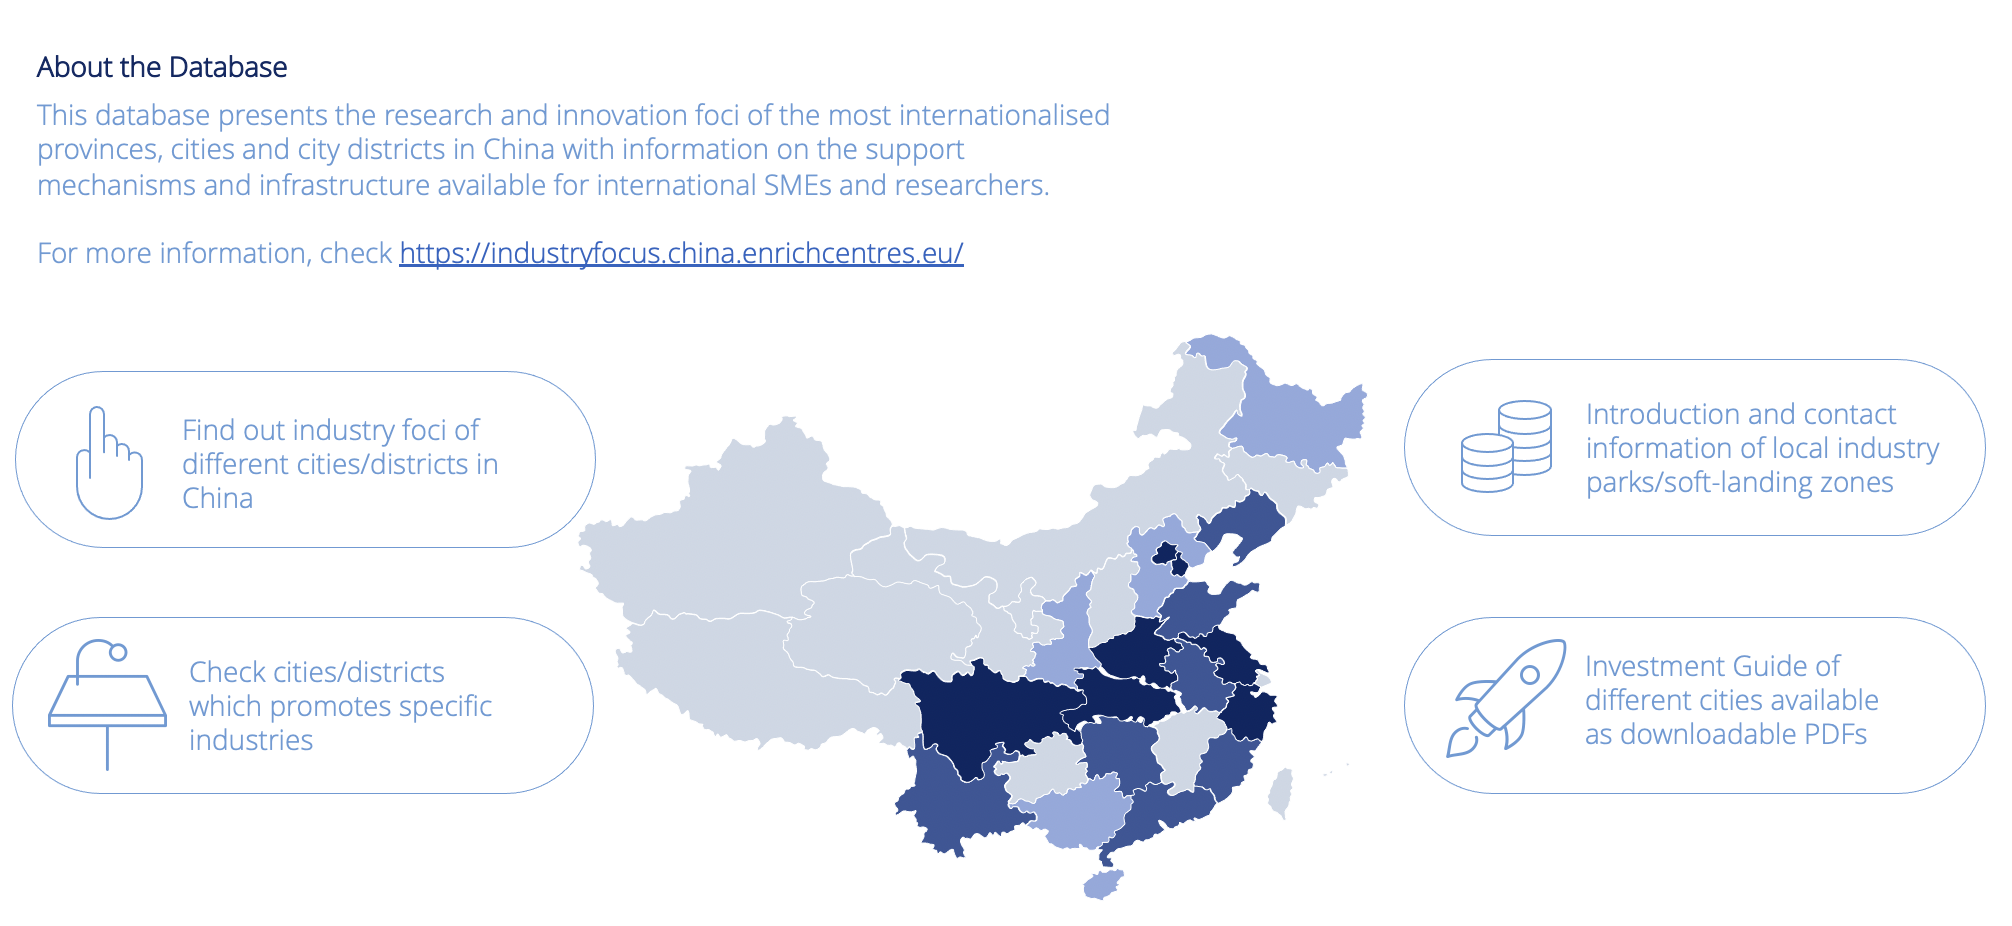 <p>This database presents the research and innovation foci of the most internationalised provinces, cities and city districts in China with information on the support mechanisms and infrastructure available for international SMEs and researchers.</p>
